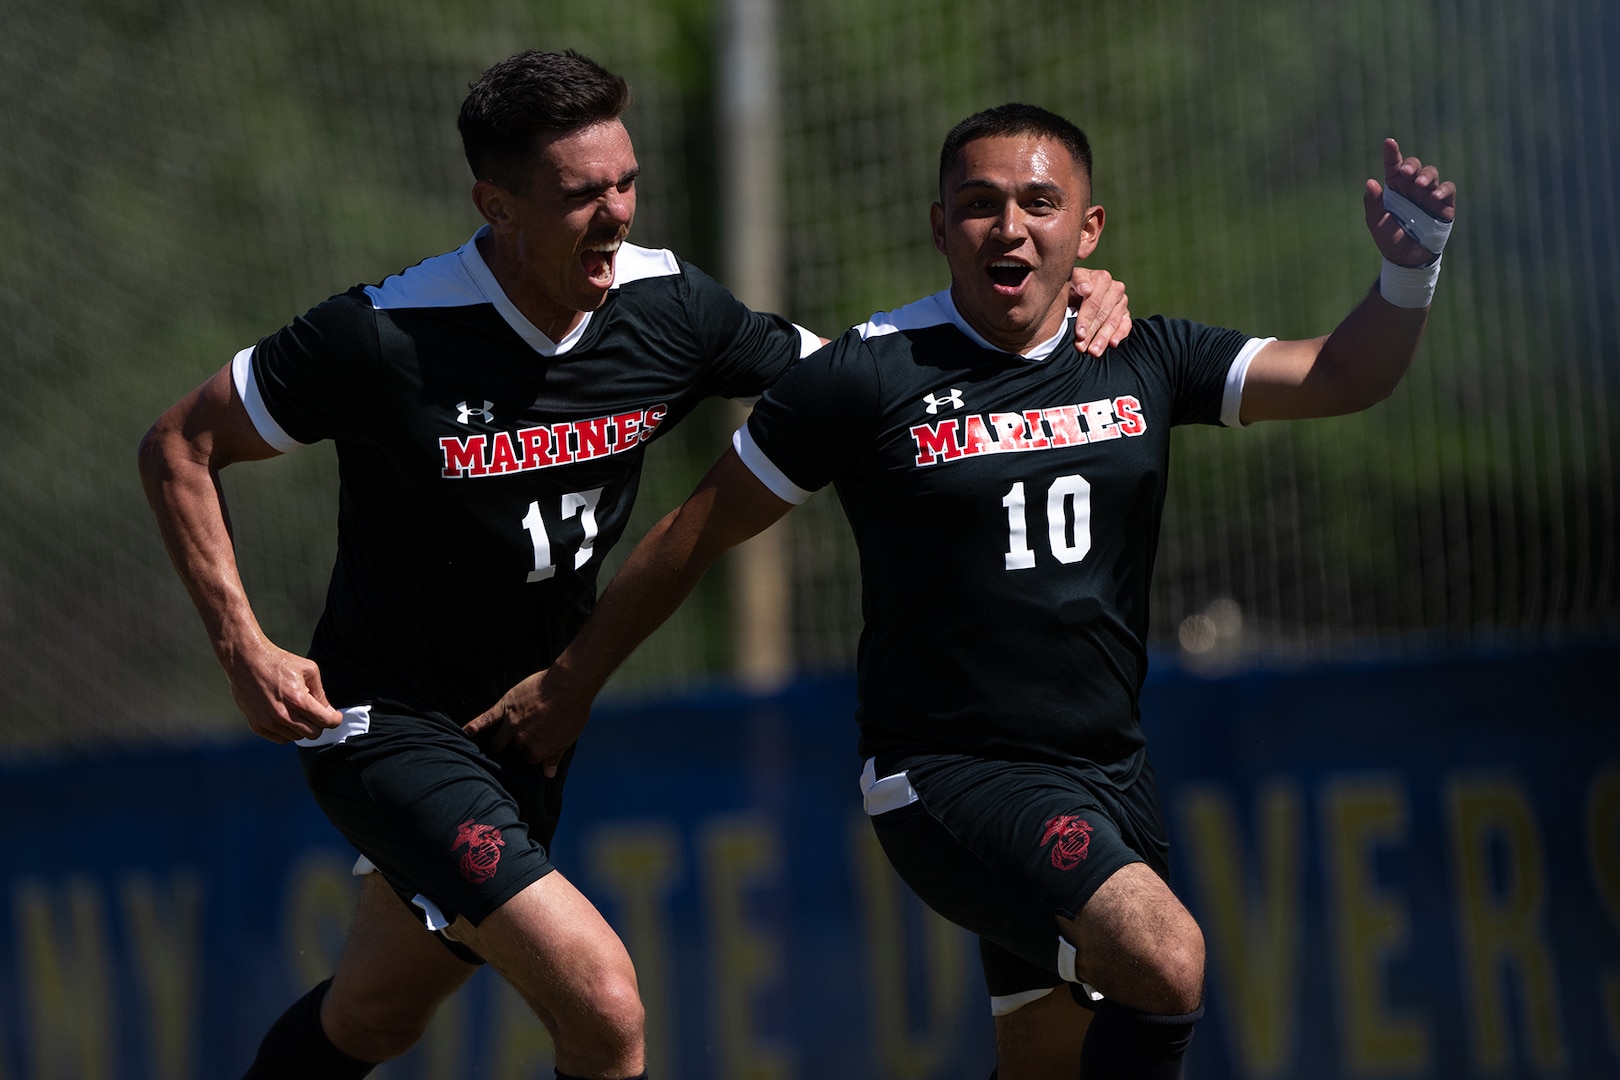 Marine Sgt. Carlos Vazquezperez of MCB Hawaii celebrates his goal with Capt. Mats Bjurman of MCB Camp Pendleton, Calif. during the 2024 Armed Forces Men's Soccer Championship hosted by Marine Corps Logistics Base Albany, Georgia at Albany State University from April 2-10. The Armed Forces Championship features teams from the Army, Marine Corps, Navy (with Coast Guard players), and Air Force (with Space Force players). (DoD photo by EJ Hersom)